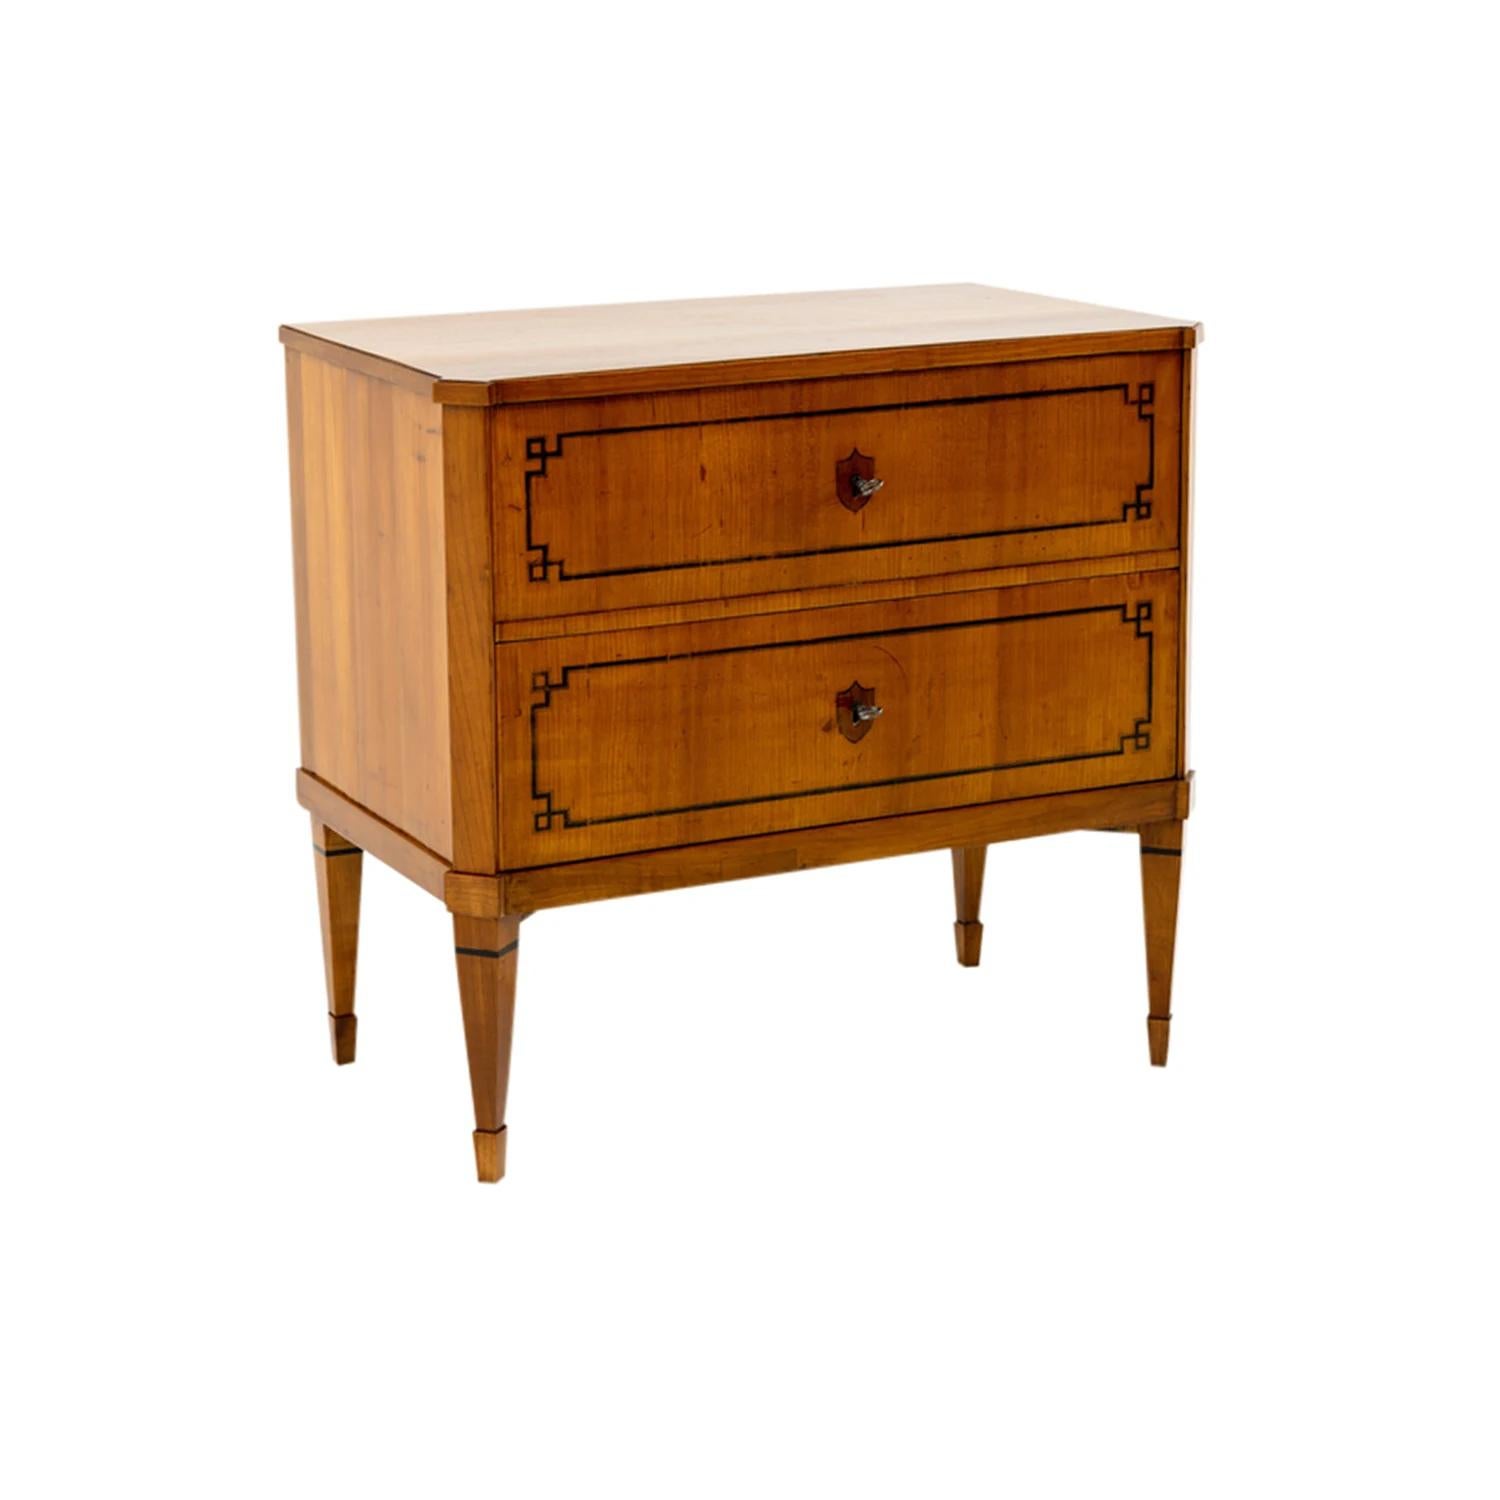 A light-brown, antique Austrian single commode with bevelled corners made of hand crafted veneered Cherrywood, in good condition. The rectangular polished chest is composed with two large drawers, standing on four square long legs. The front part of